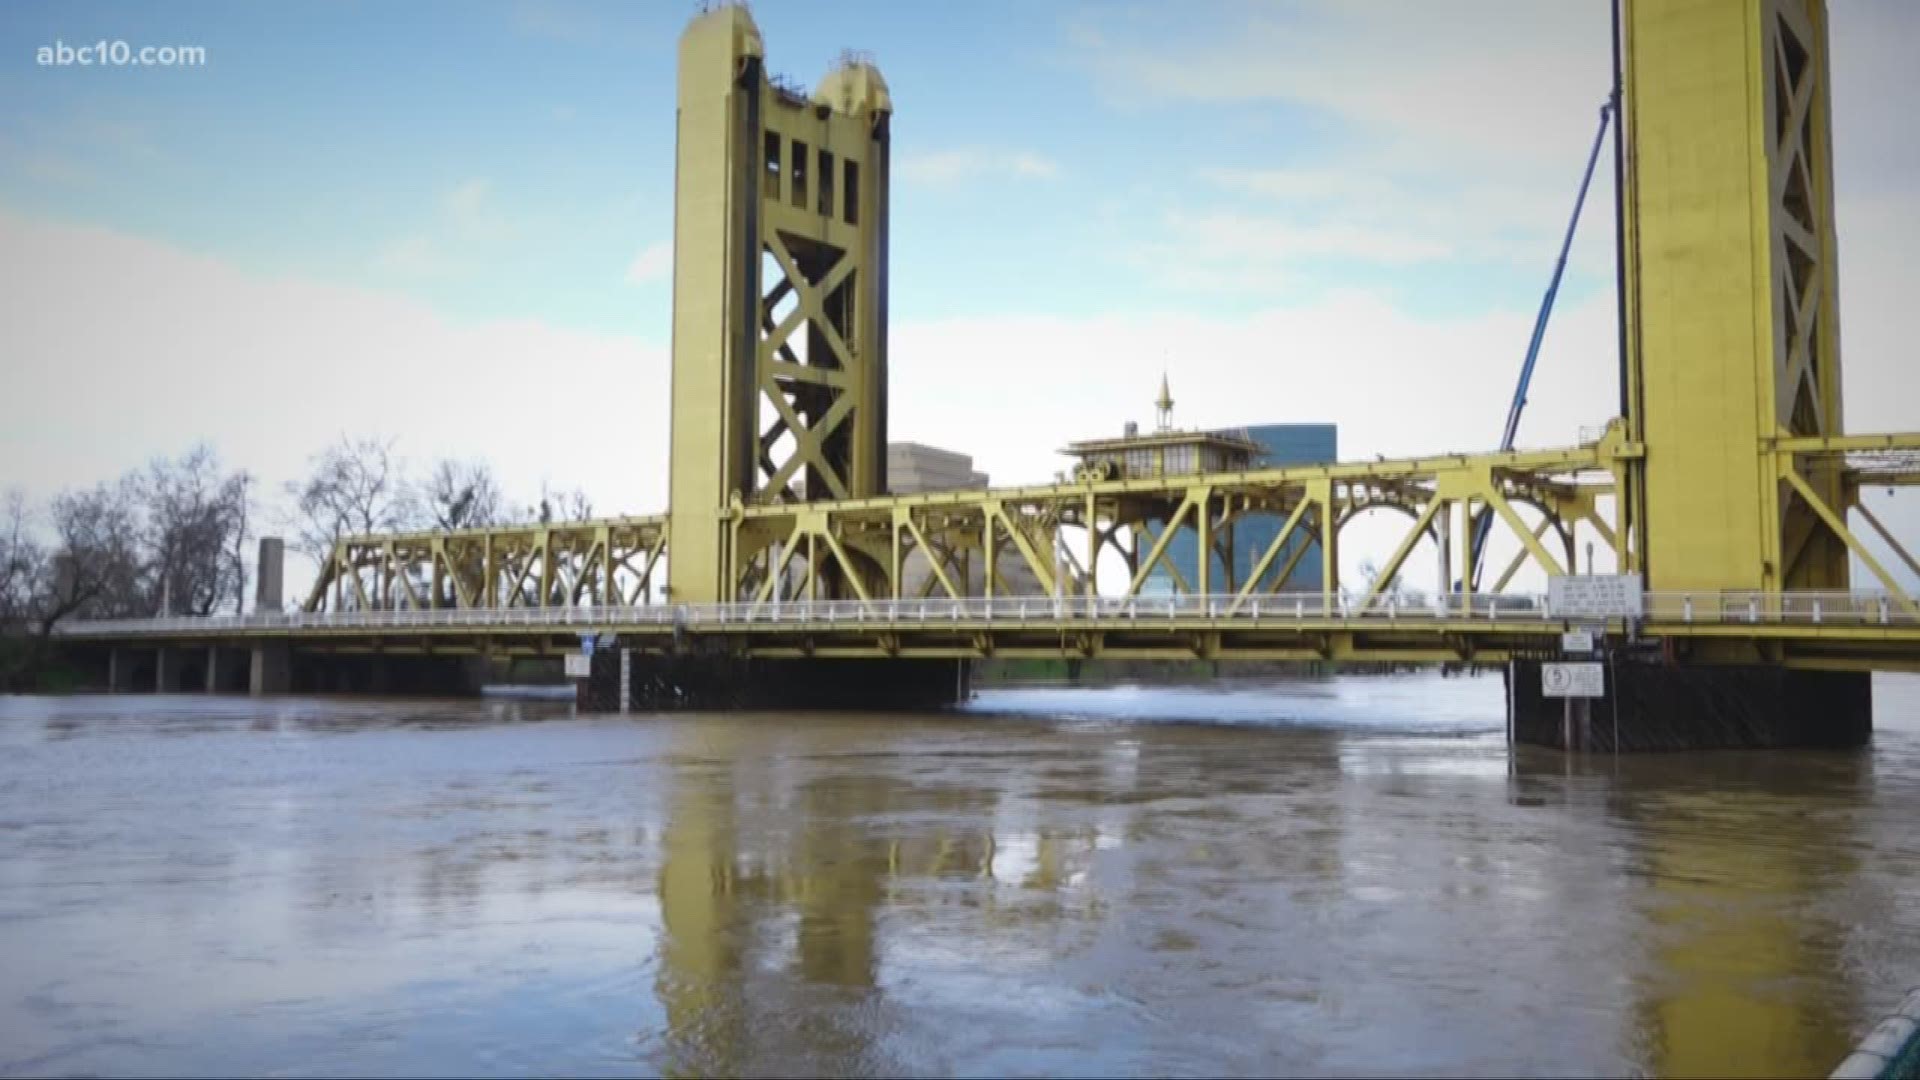 After a week of heavy storms, the water is rising in the Sacramento and American rivers.